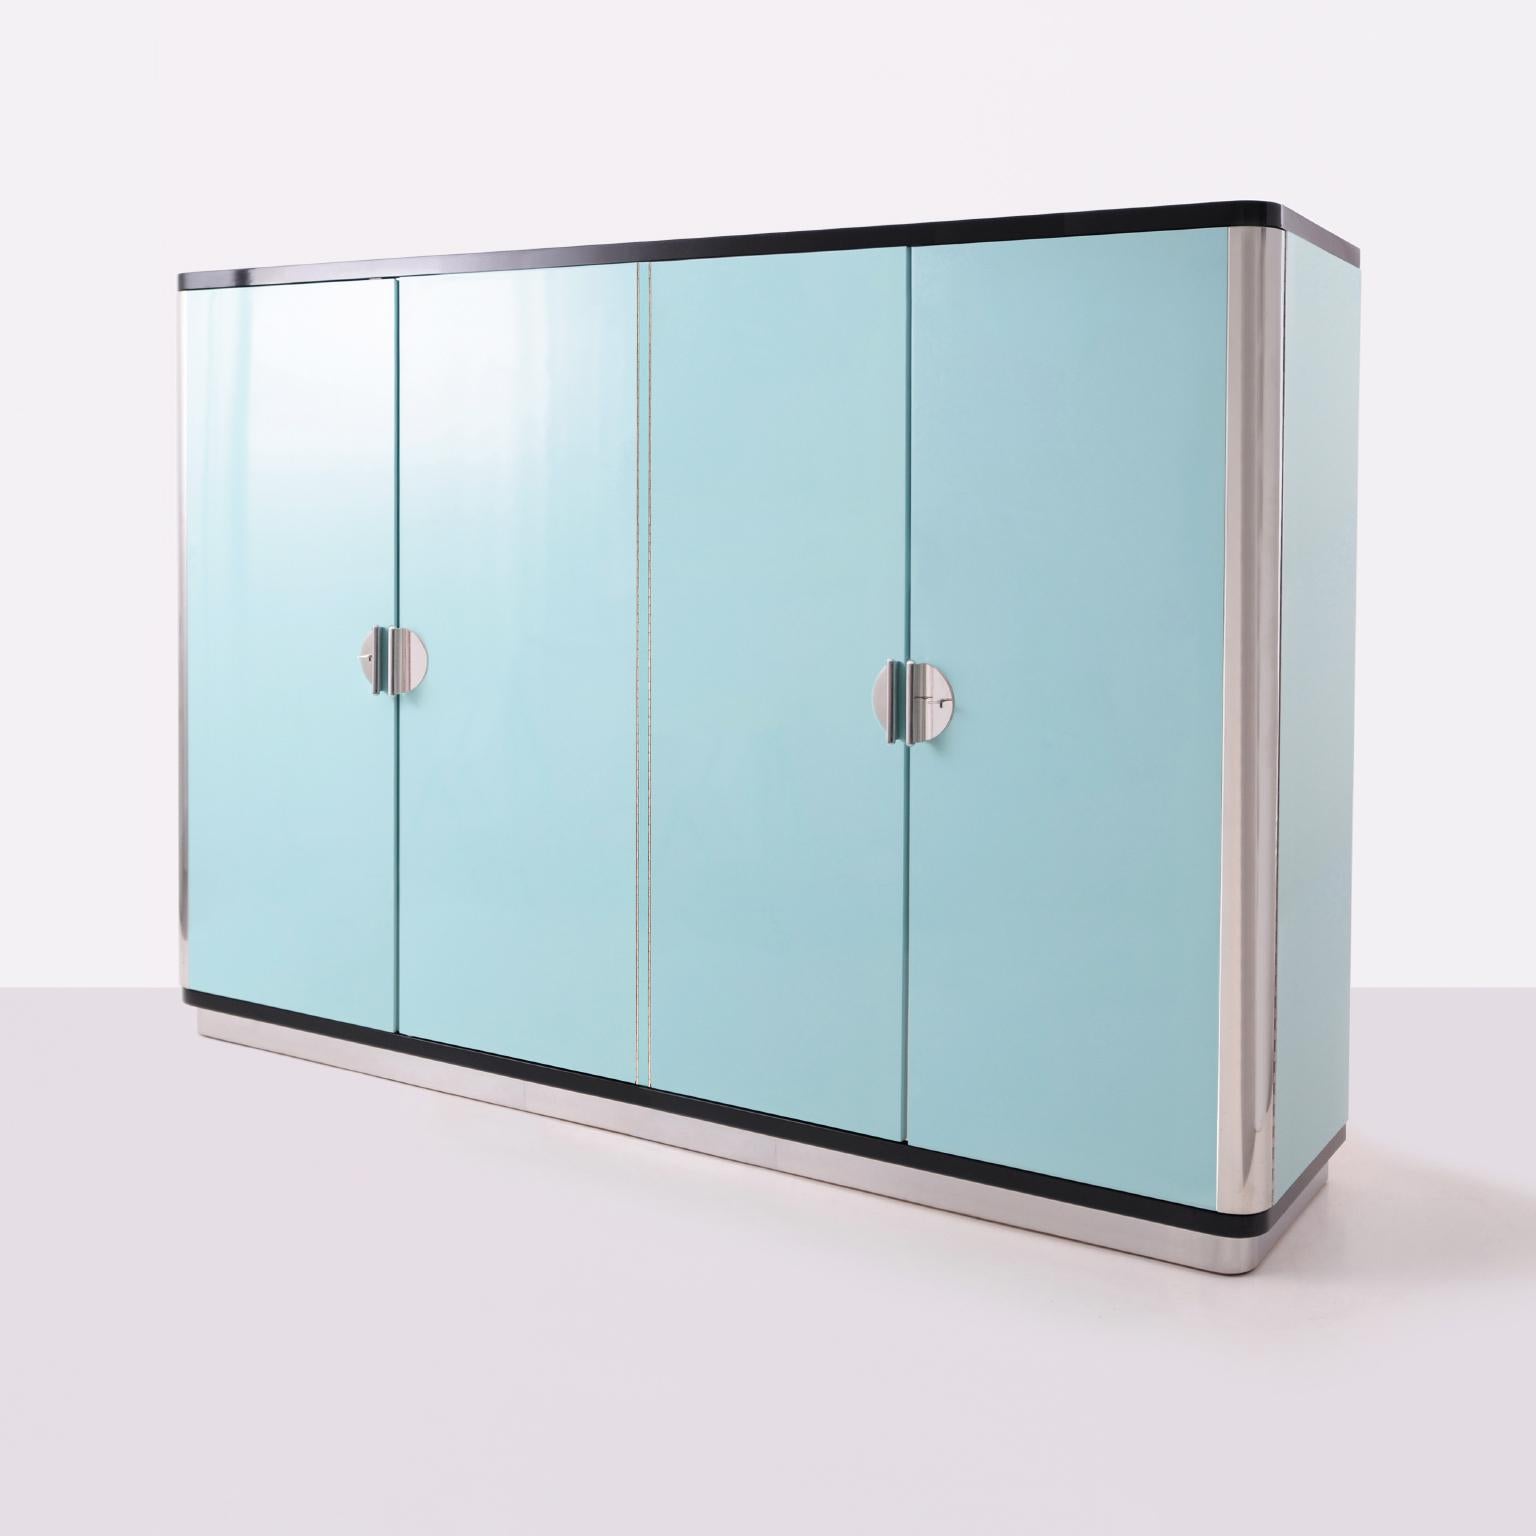 Customized four-door wardrobe, manufactured by GMD Berlin, exclusively presented in our Rudolf Vichr Collection.

These high-quality, handmade furniture in a classic modern timeless design, are made from selected materials according to traditional